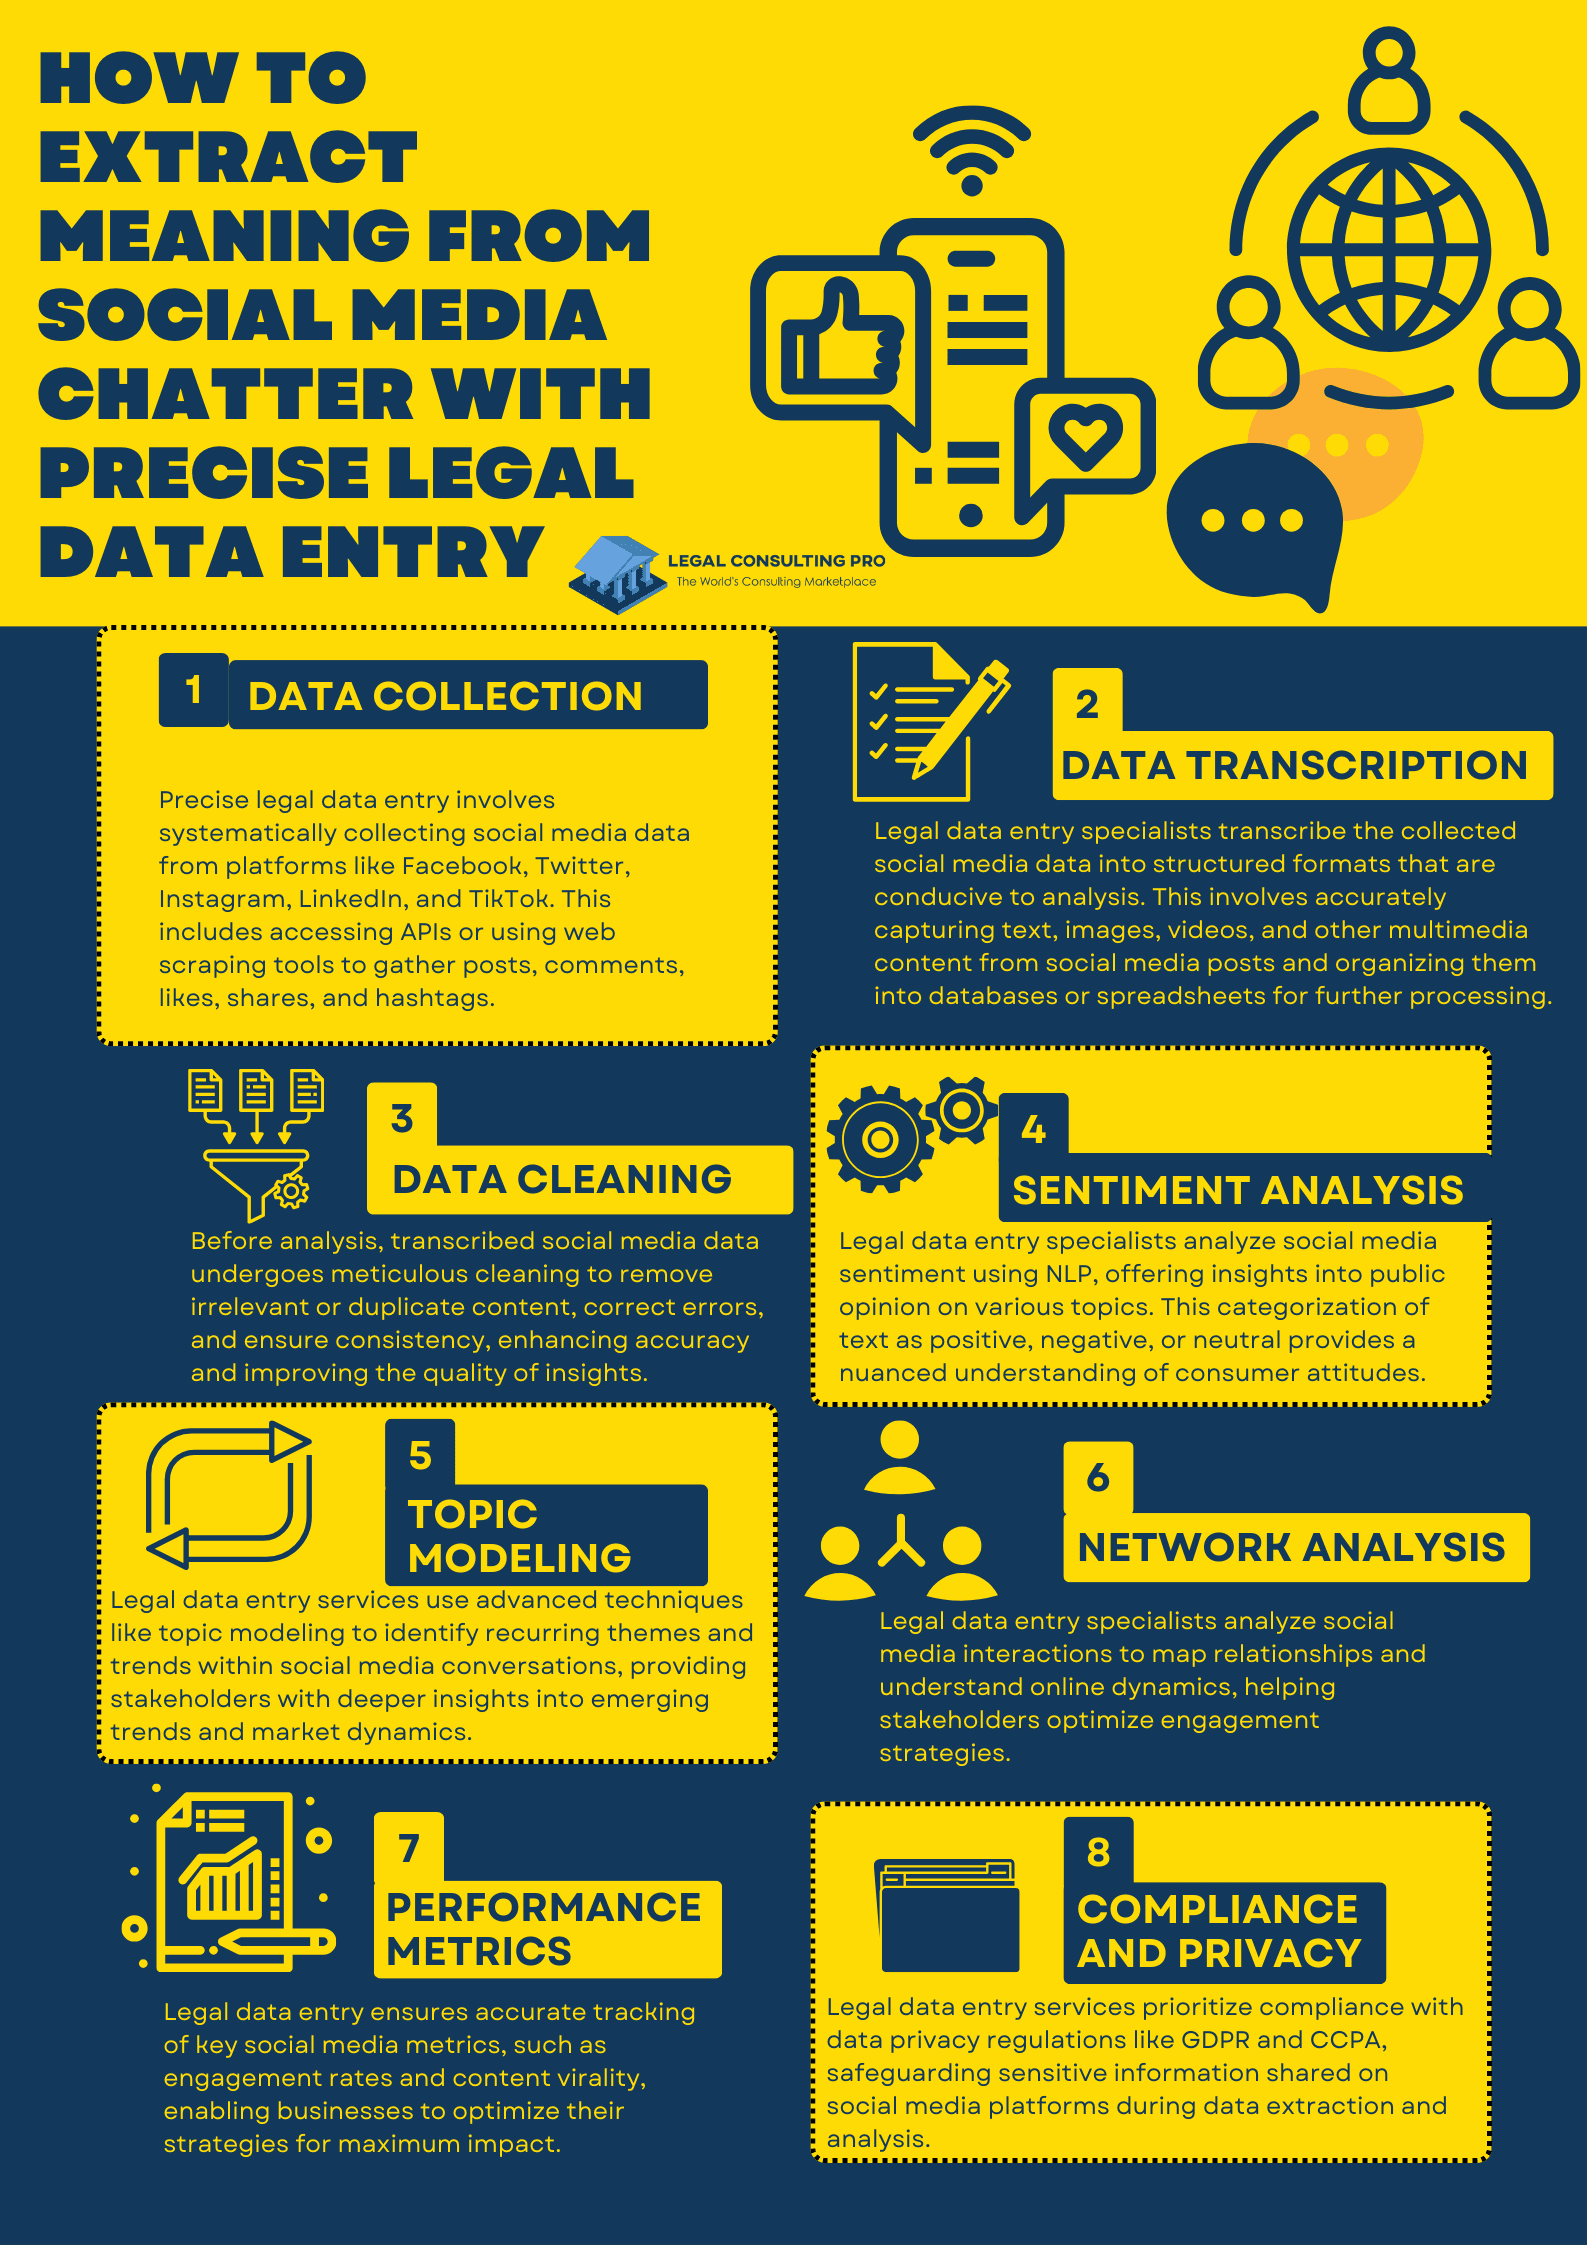 How to Extract Meaning from Social Media Chatter with Precise Legal Data Entry Infographic